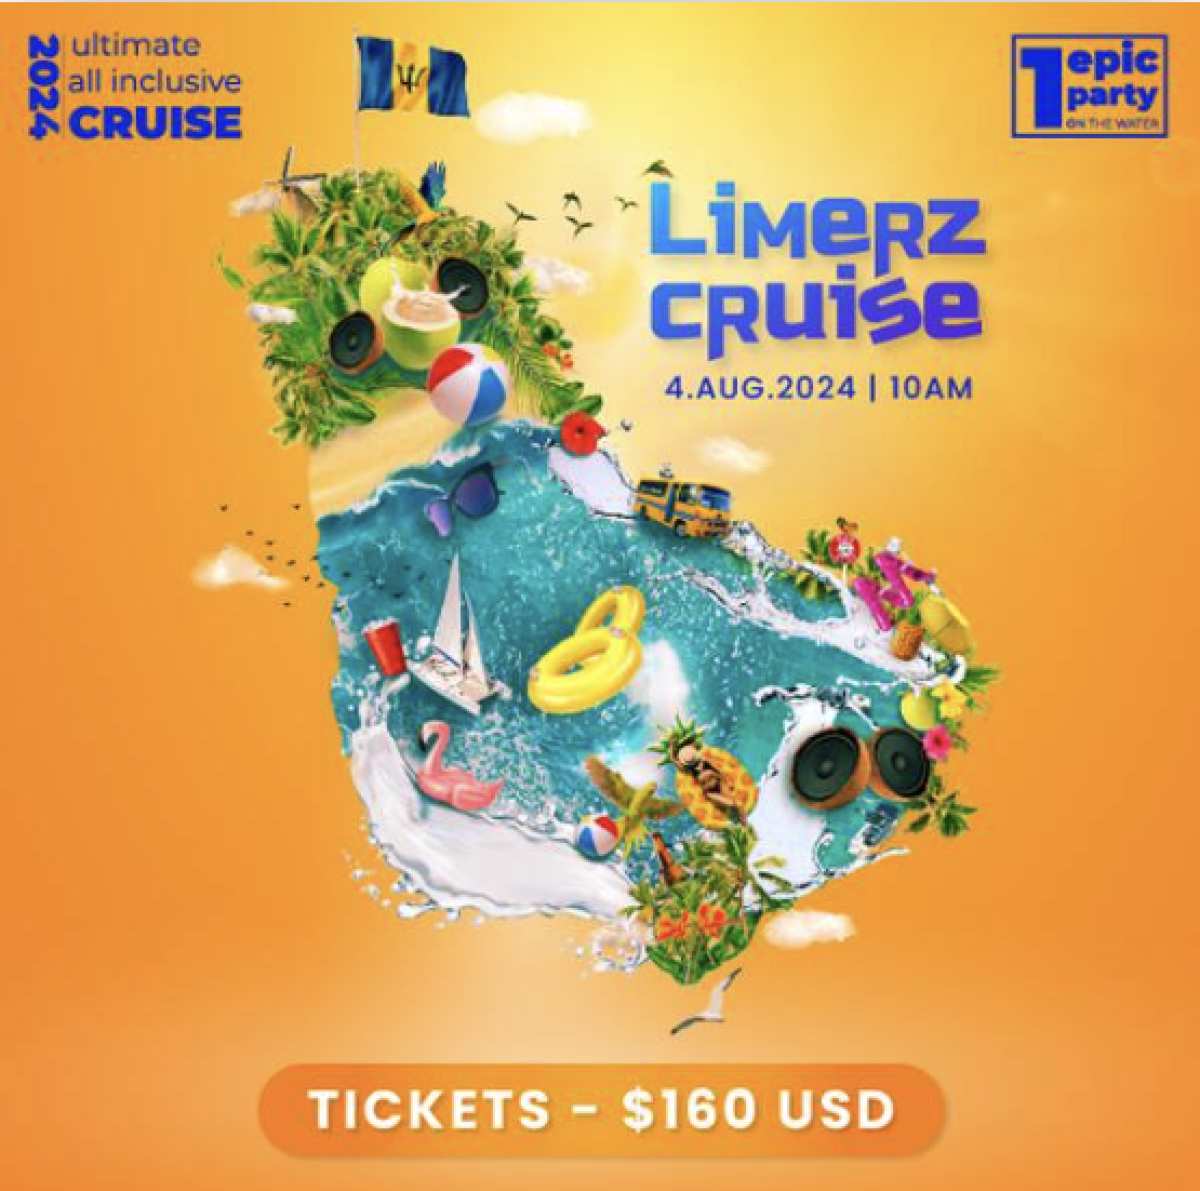 Limerz Cruise flyer or graphic.